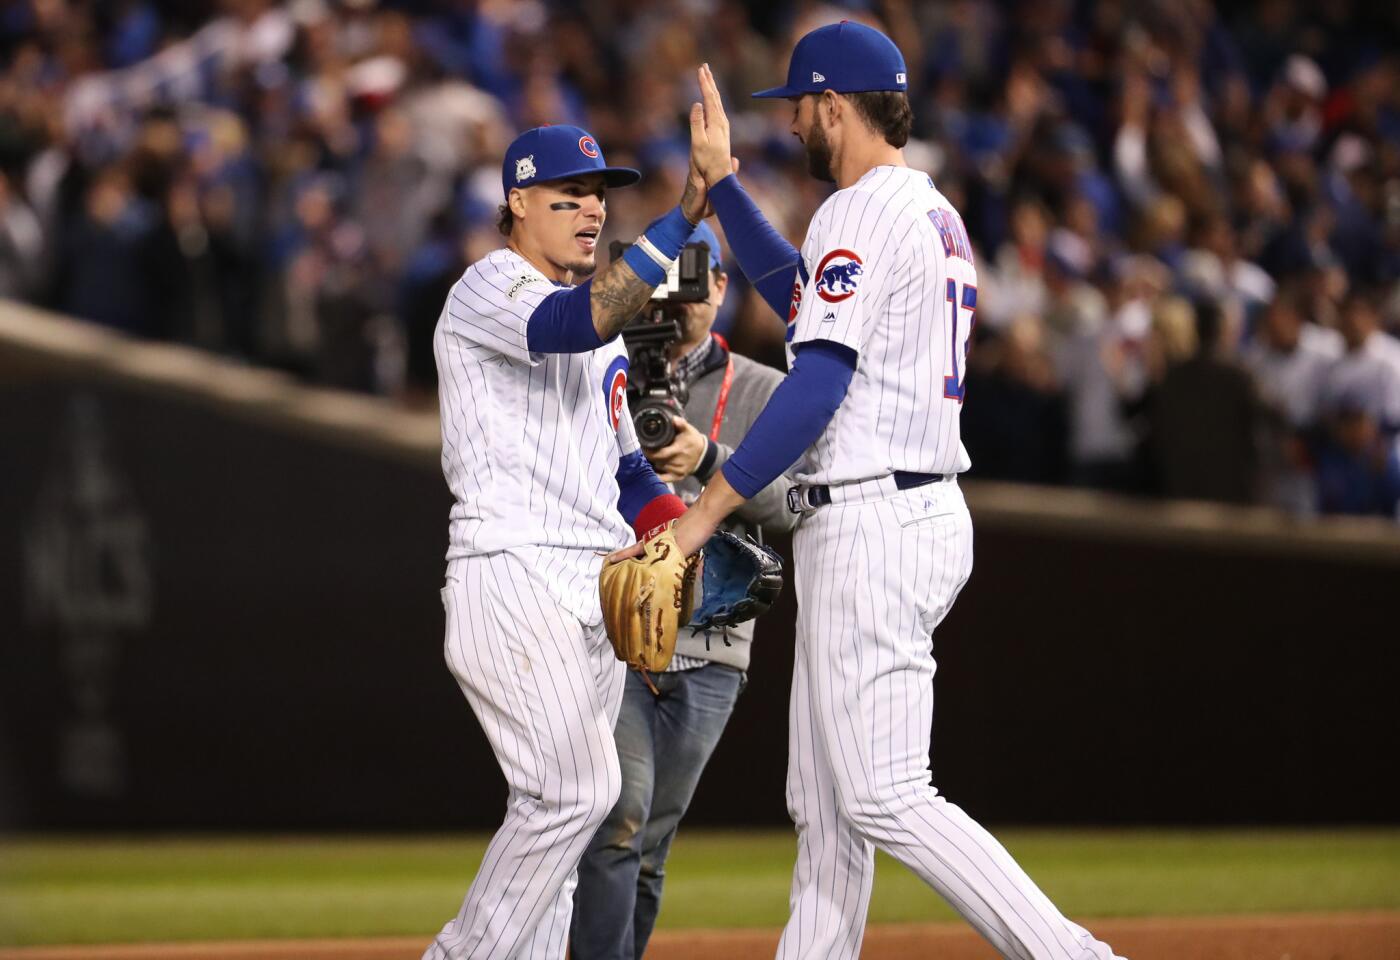 Cubs second baseman Javier Baez (9) and third baseman Kris Bryant (17) celebrate the win over the Dodgers.